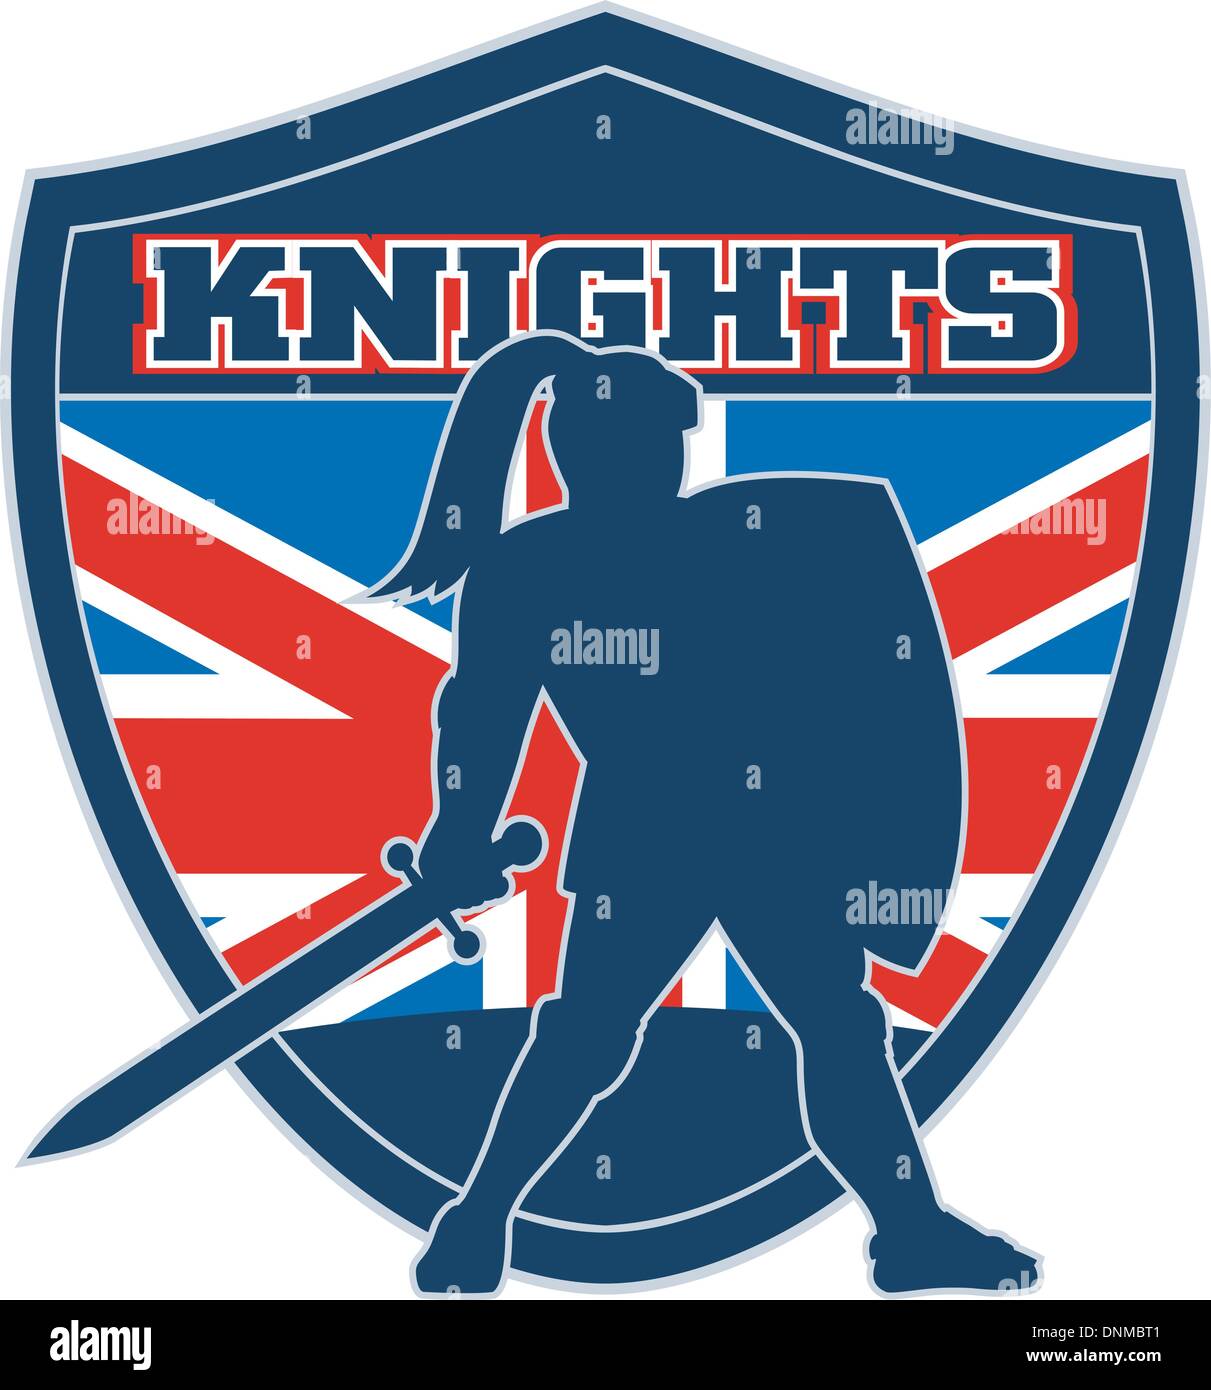 illustration of a Knight silhouette with sword and shield facing side with GB Great Britain British union jack flag in background words Knights' suitable as mascot for any sports or sporting club or organization' Stock Vector